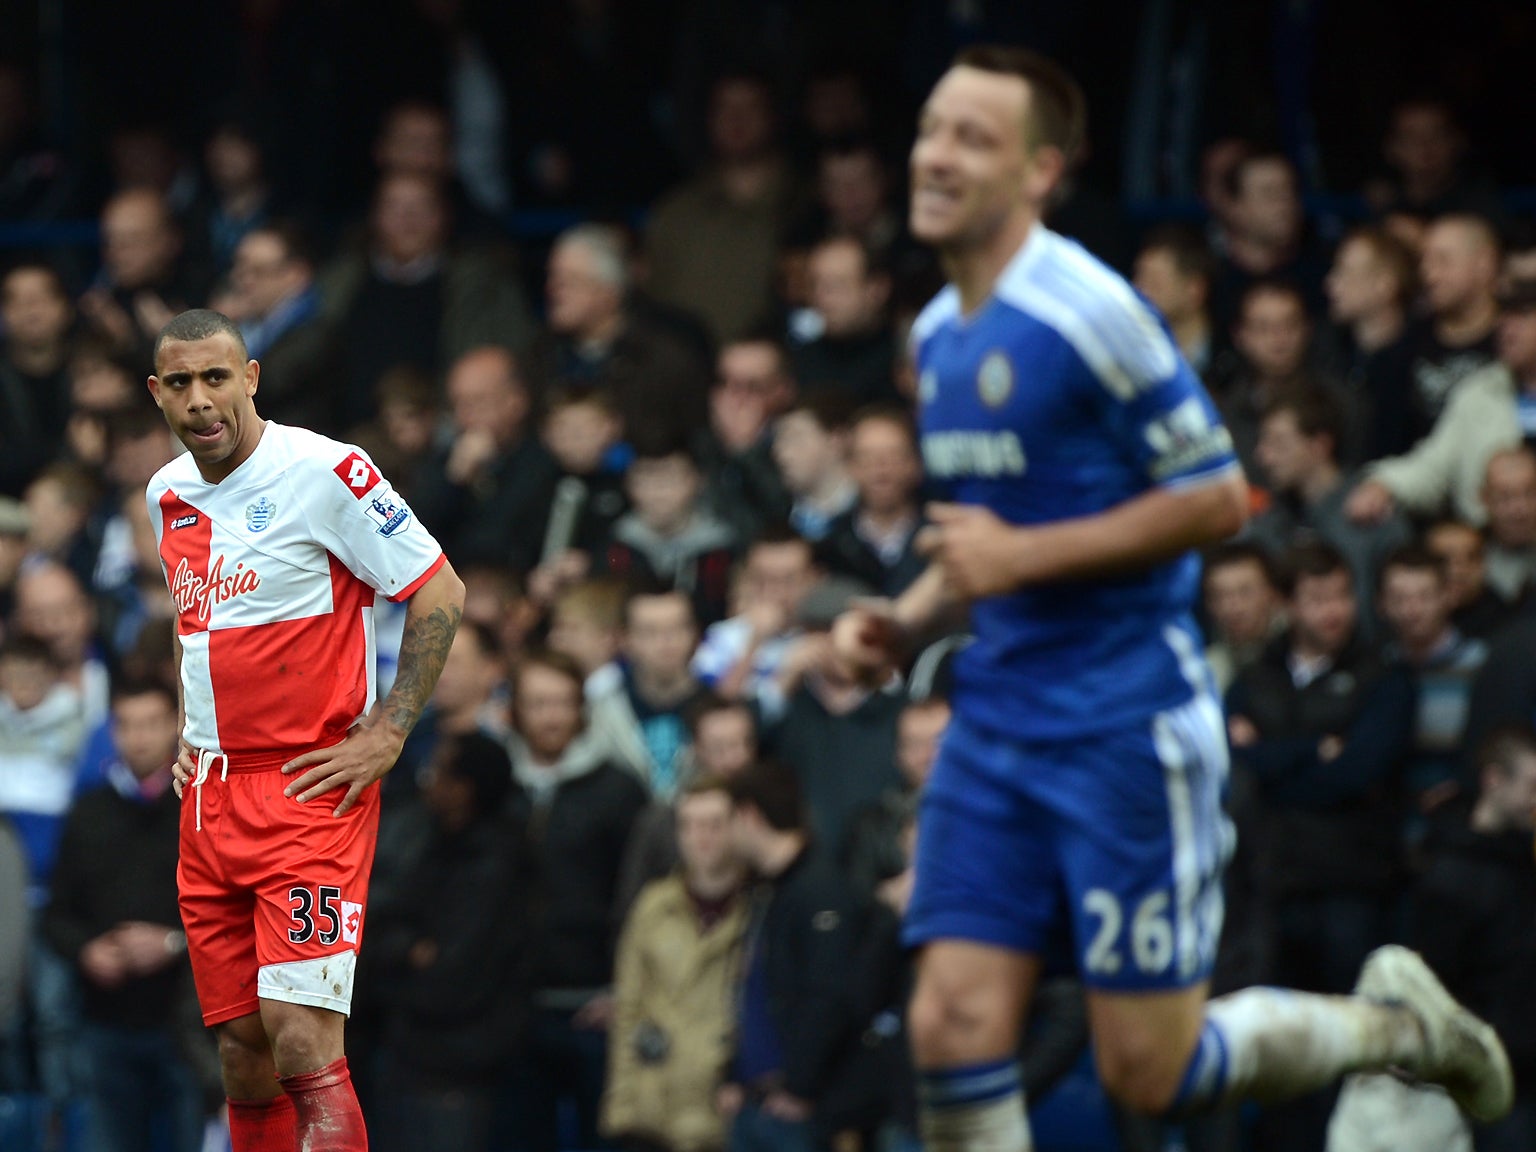 29 April 2012: Anton Ferdinand (left) looks on as John Terry during the Premier League match between Chelsea and QPR